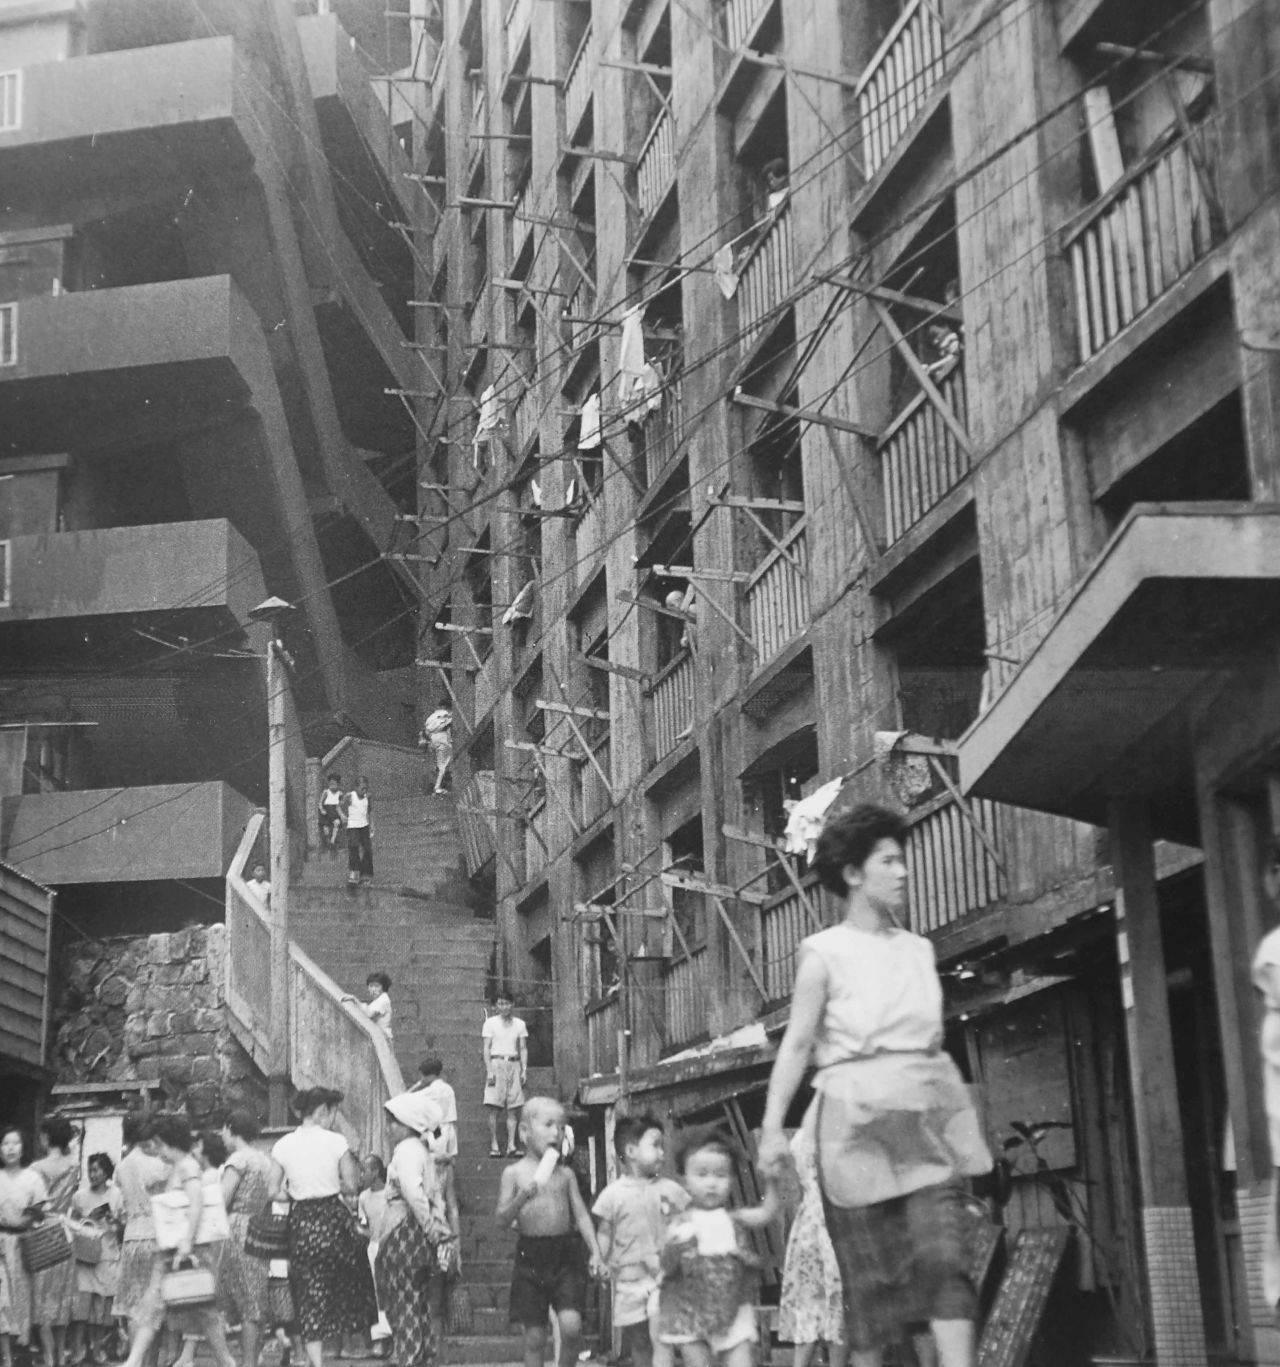 Archive photograph from before World War II shows the steep stairs leading into the warren of apartments inside the huge housing blocks on Hashima.